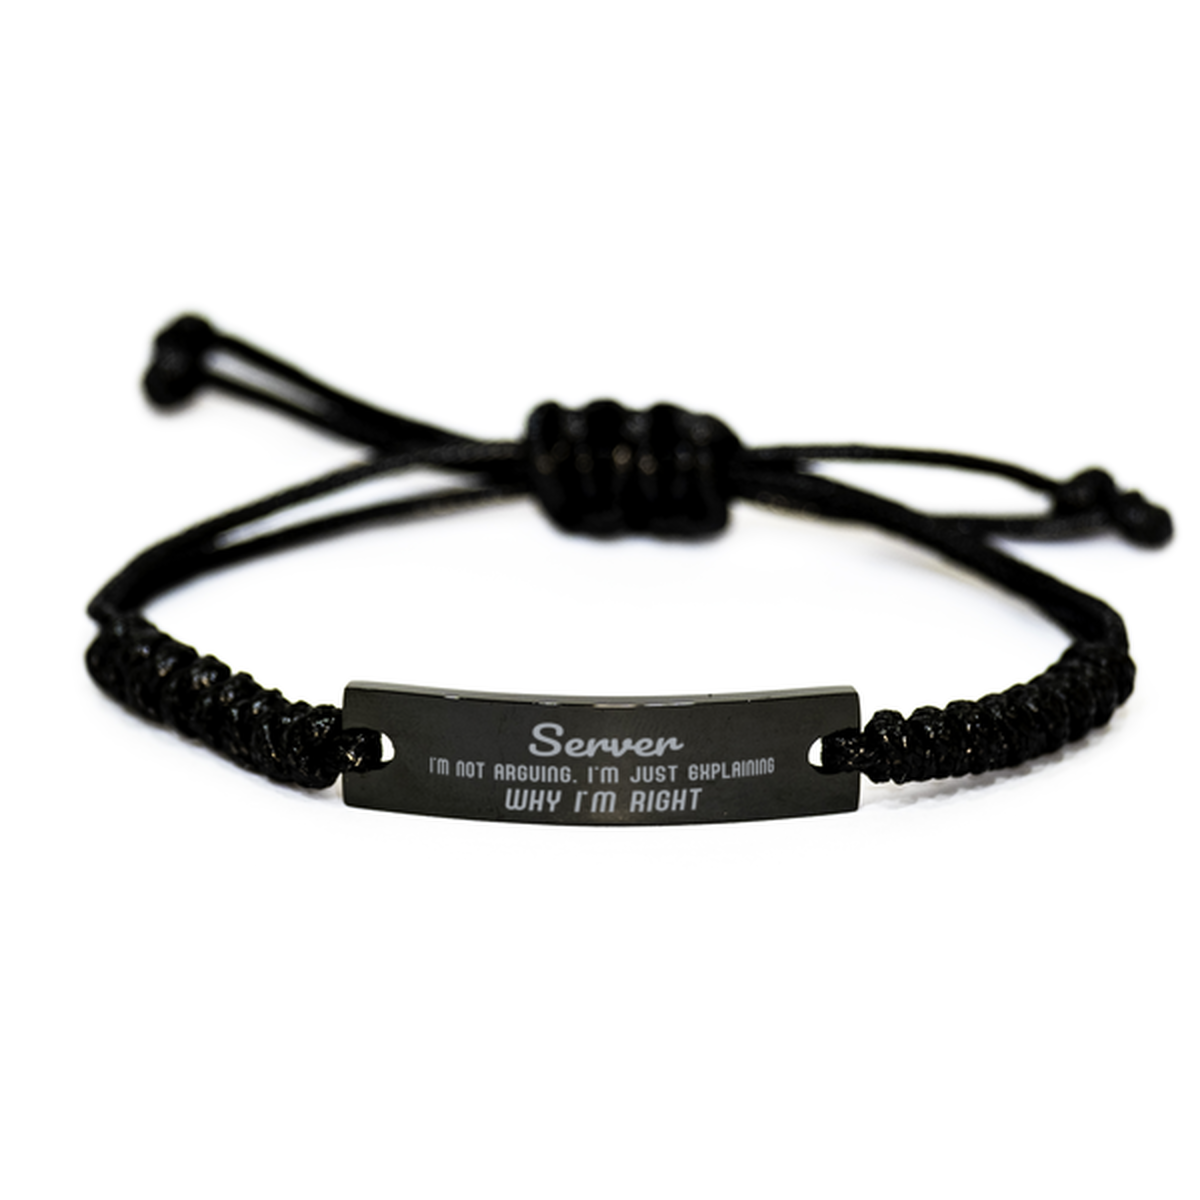 Server I'm not Arguing. I'm Just Explaining Why I'm RIGHT Black Rope Bracelet, Funny Saying Quote Server Gifts For Server Graduation Birthday Christmas Gifts for Men Women Coworker